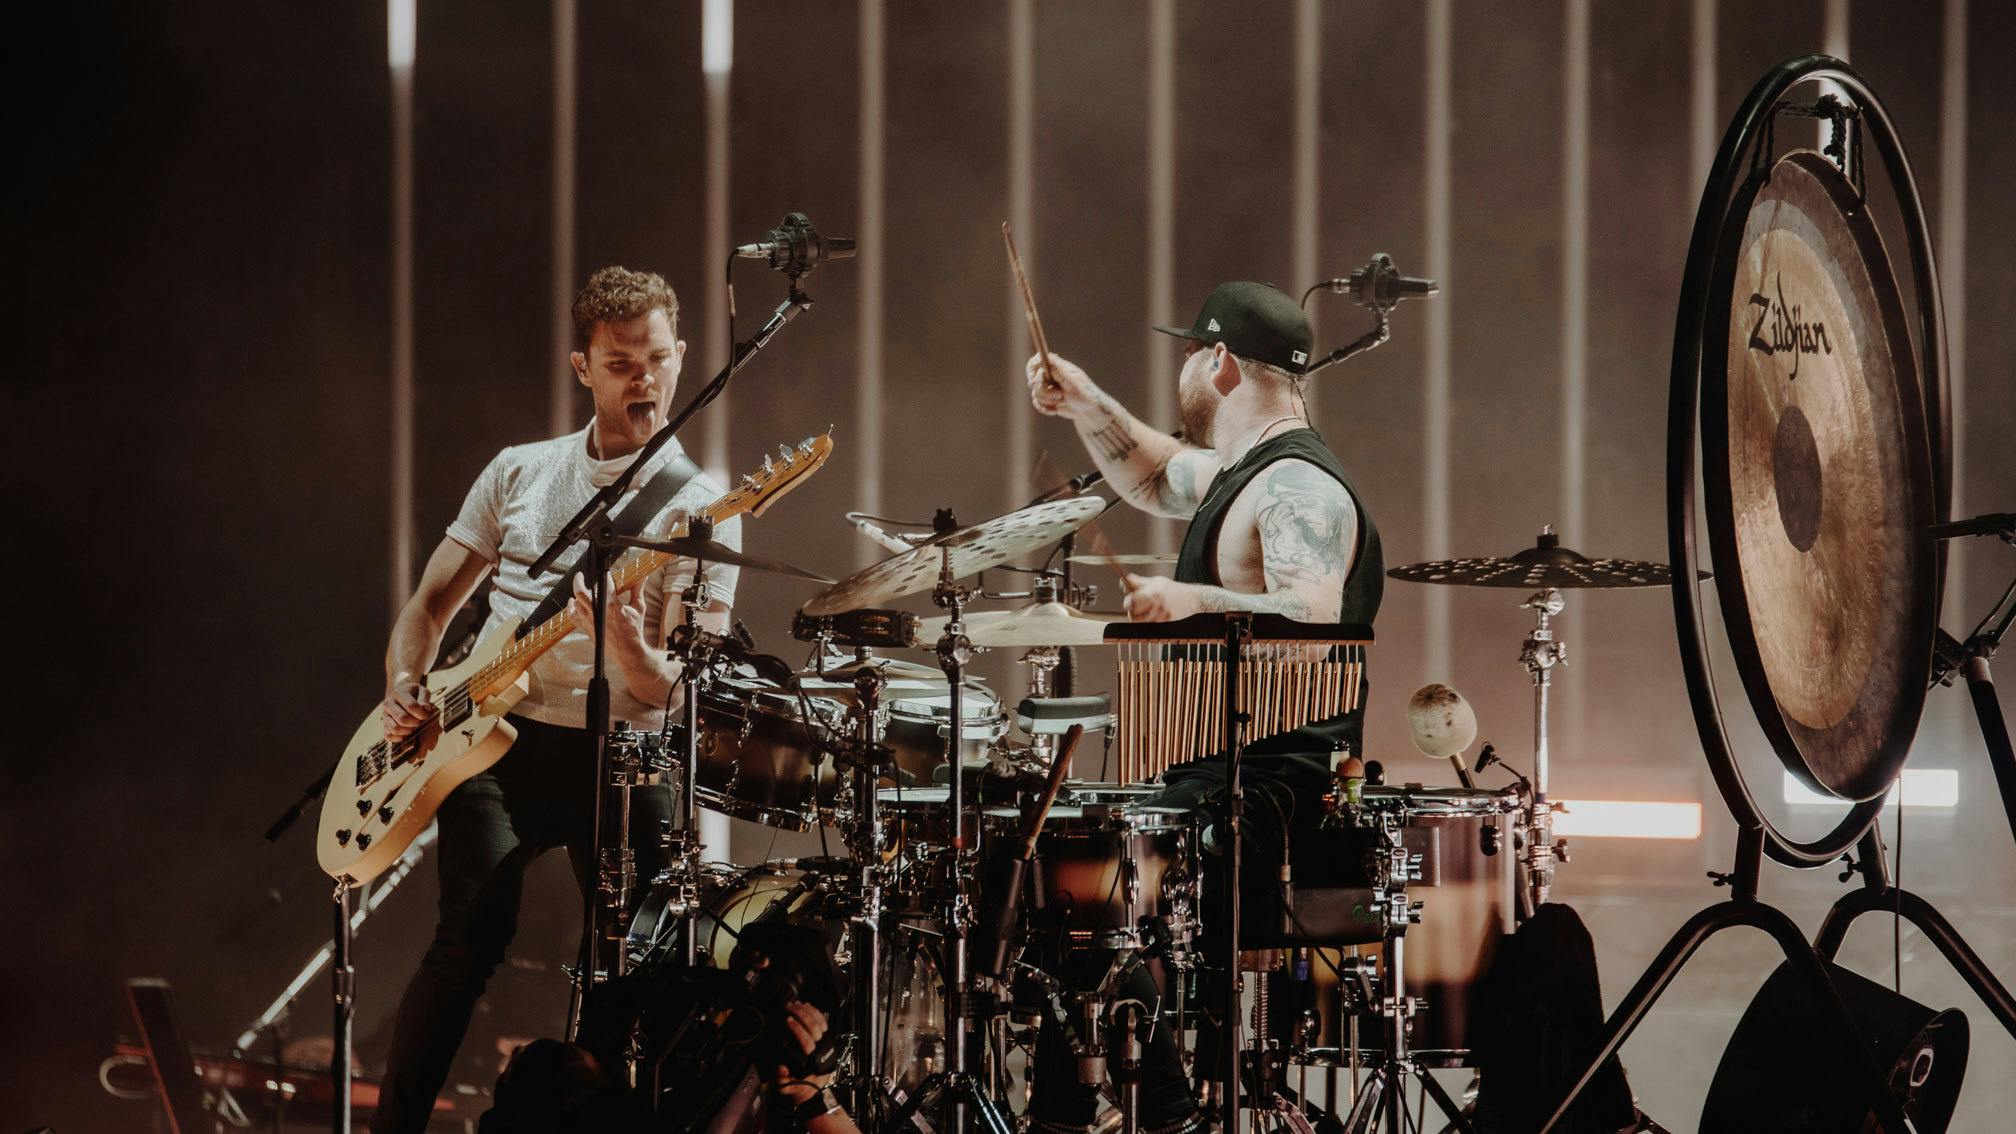 Live review: Royal Blood, London The O2